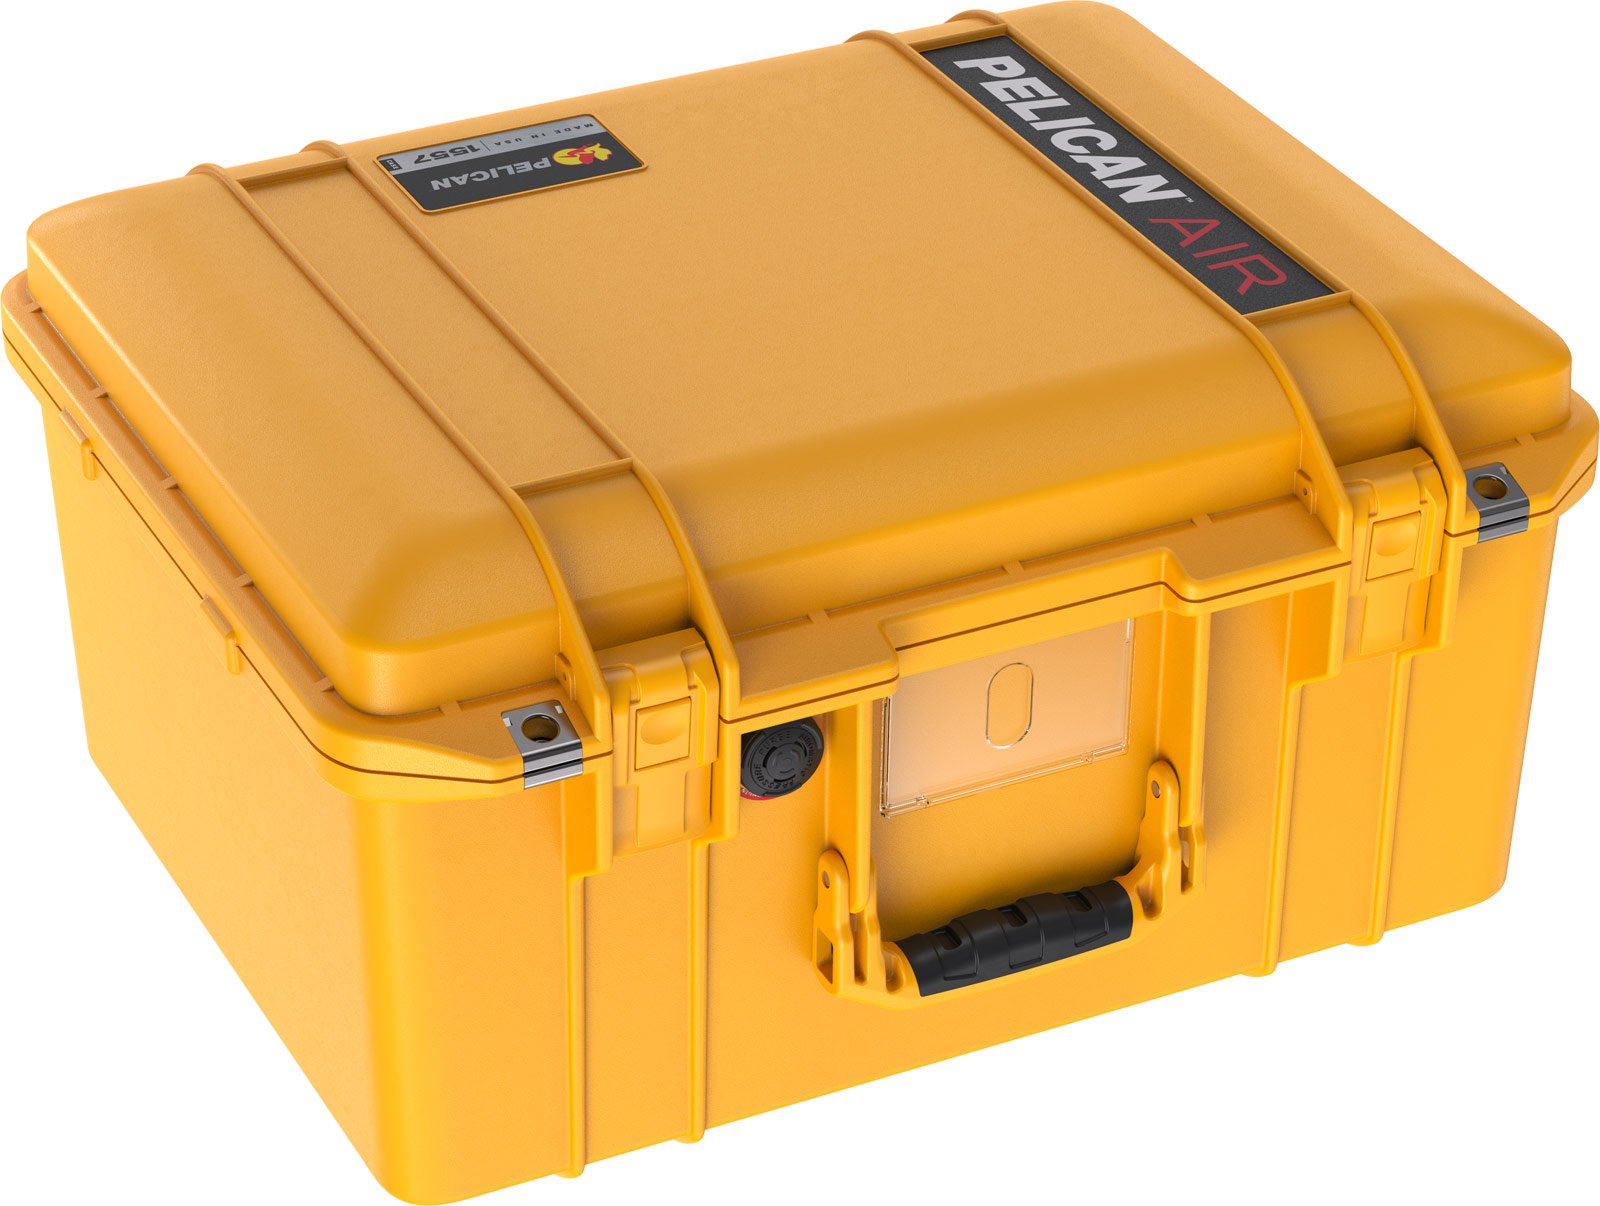 Pelican Protector Case 1557 Air Case - With Foam - Yellow